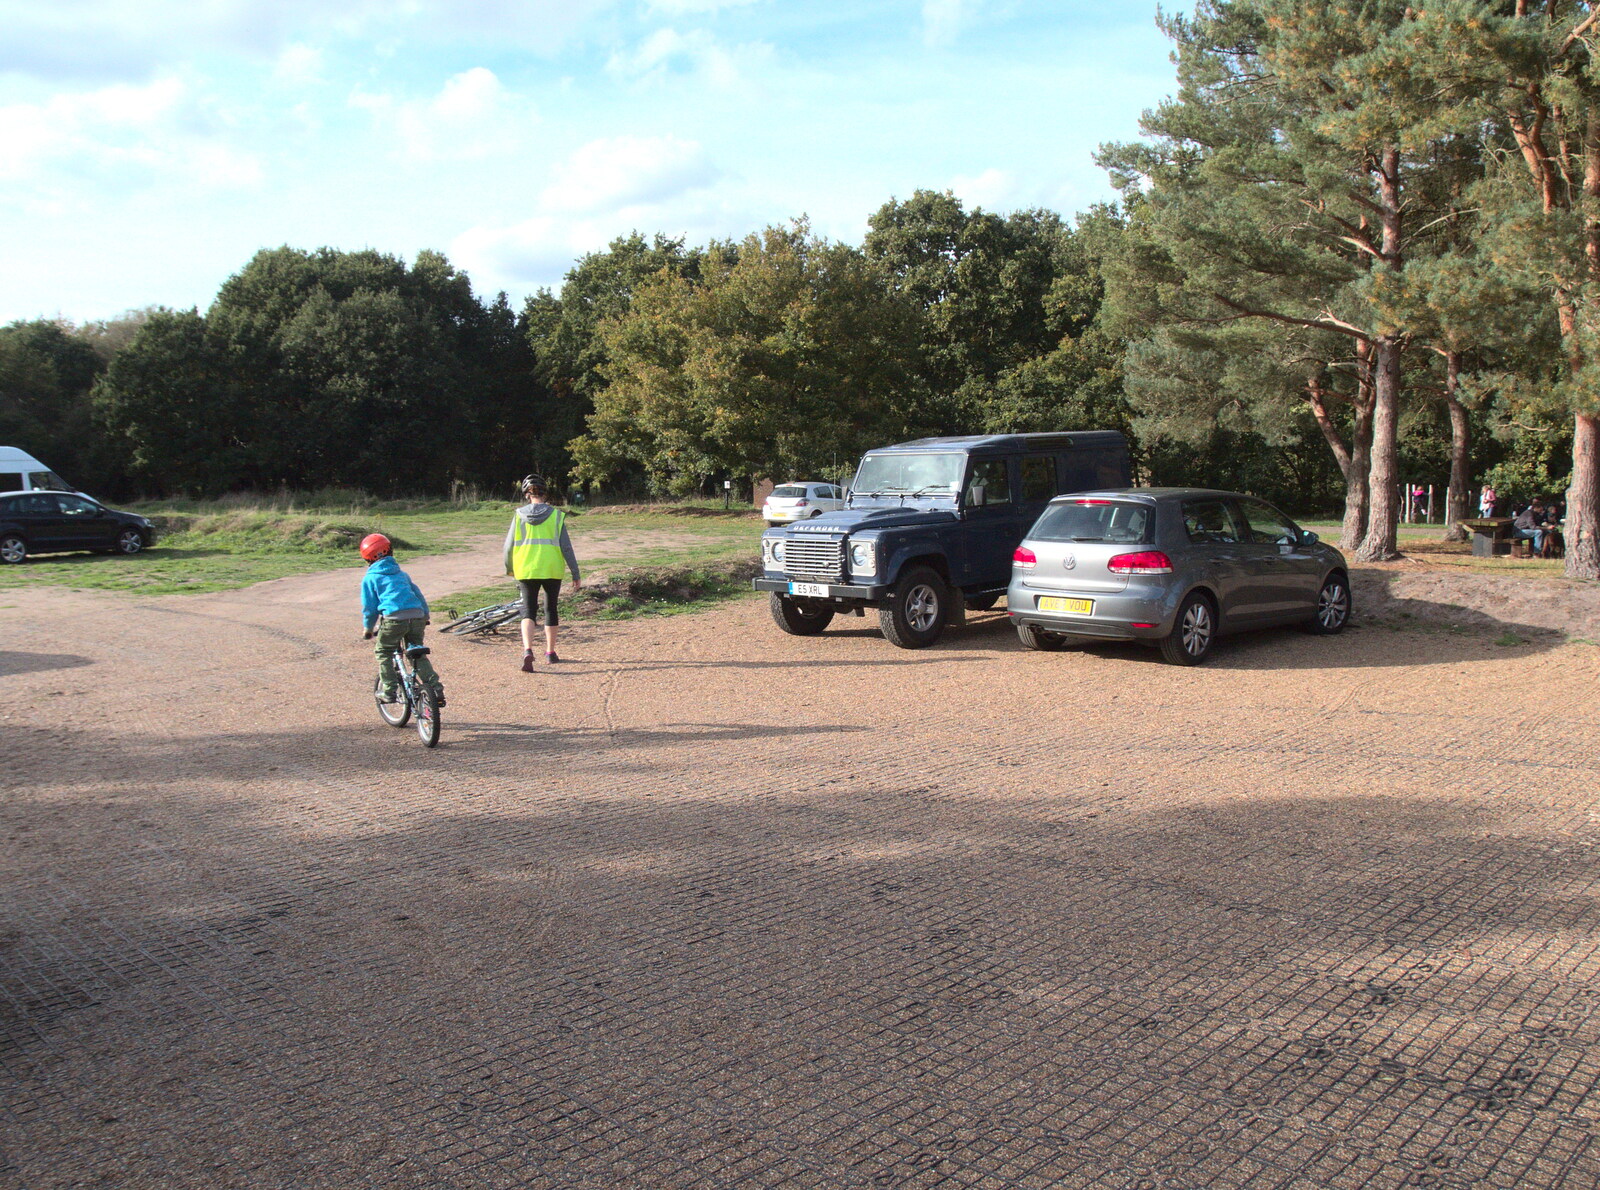 Harry cycles off across the car park from Evidence of Autumn: Geocaching on Knettishall Heath, Suffolk - 7th October 2018